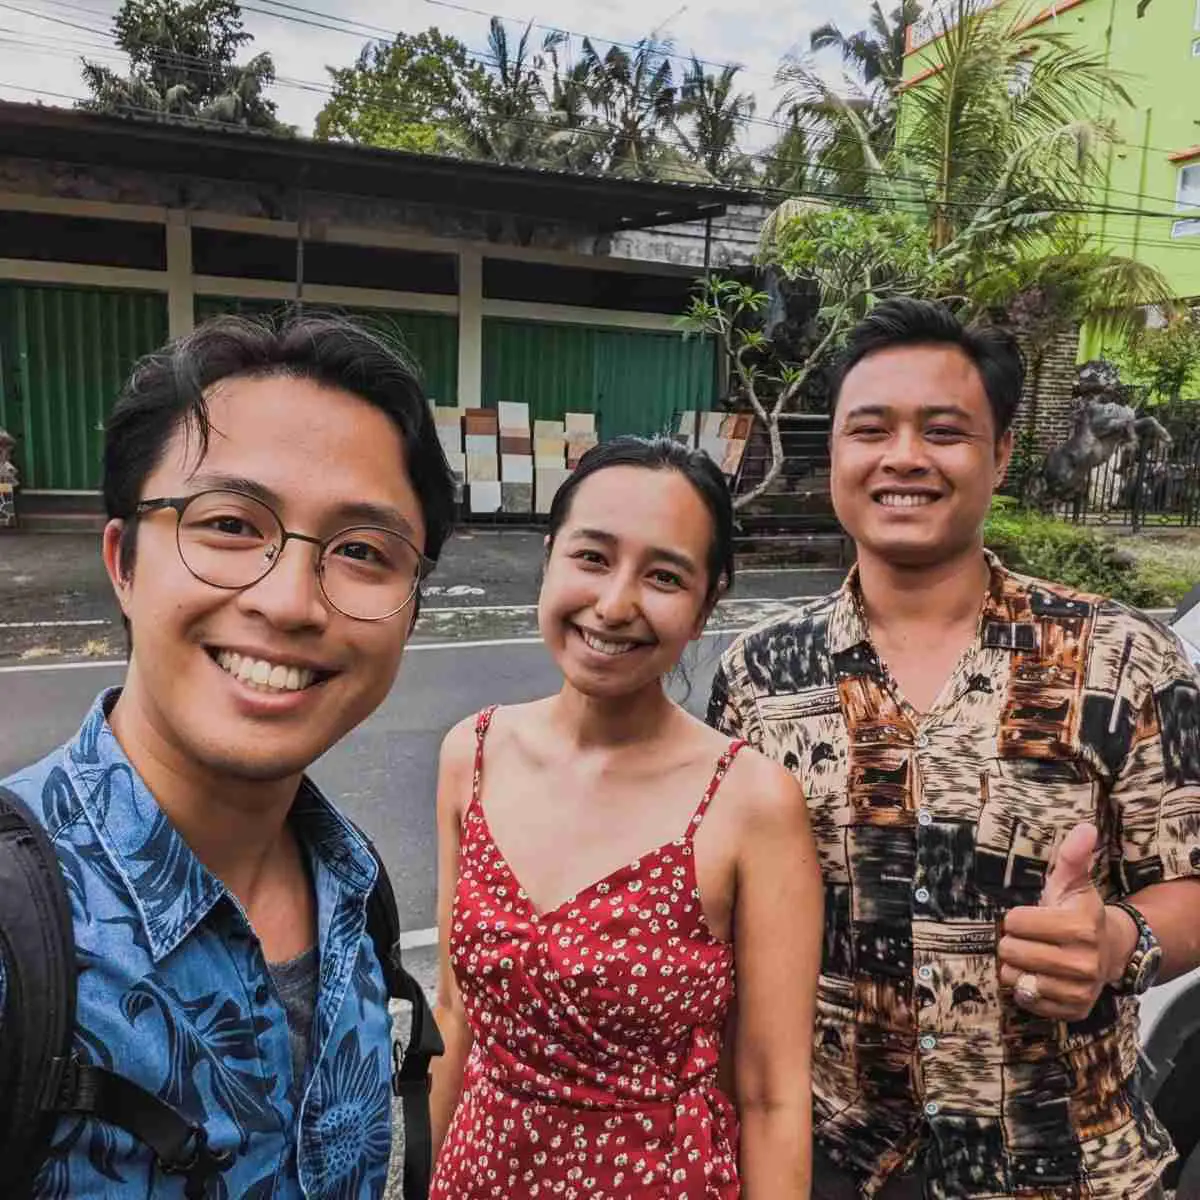 With our excellent tour guide, Iko, who showed us around Ubud